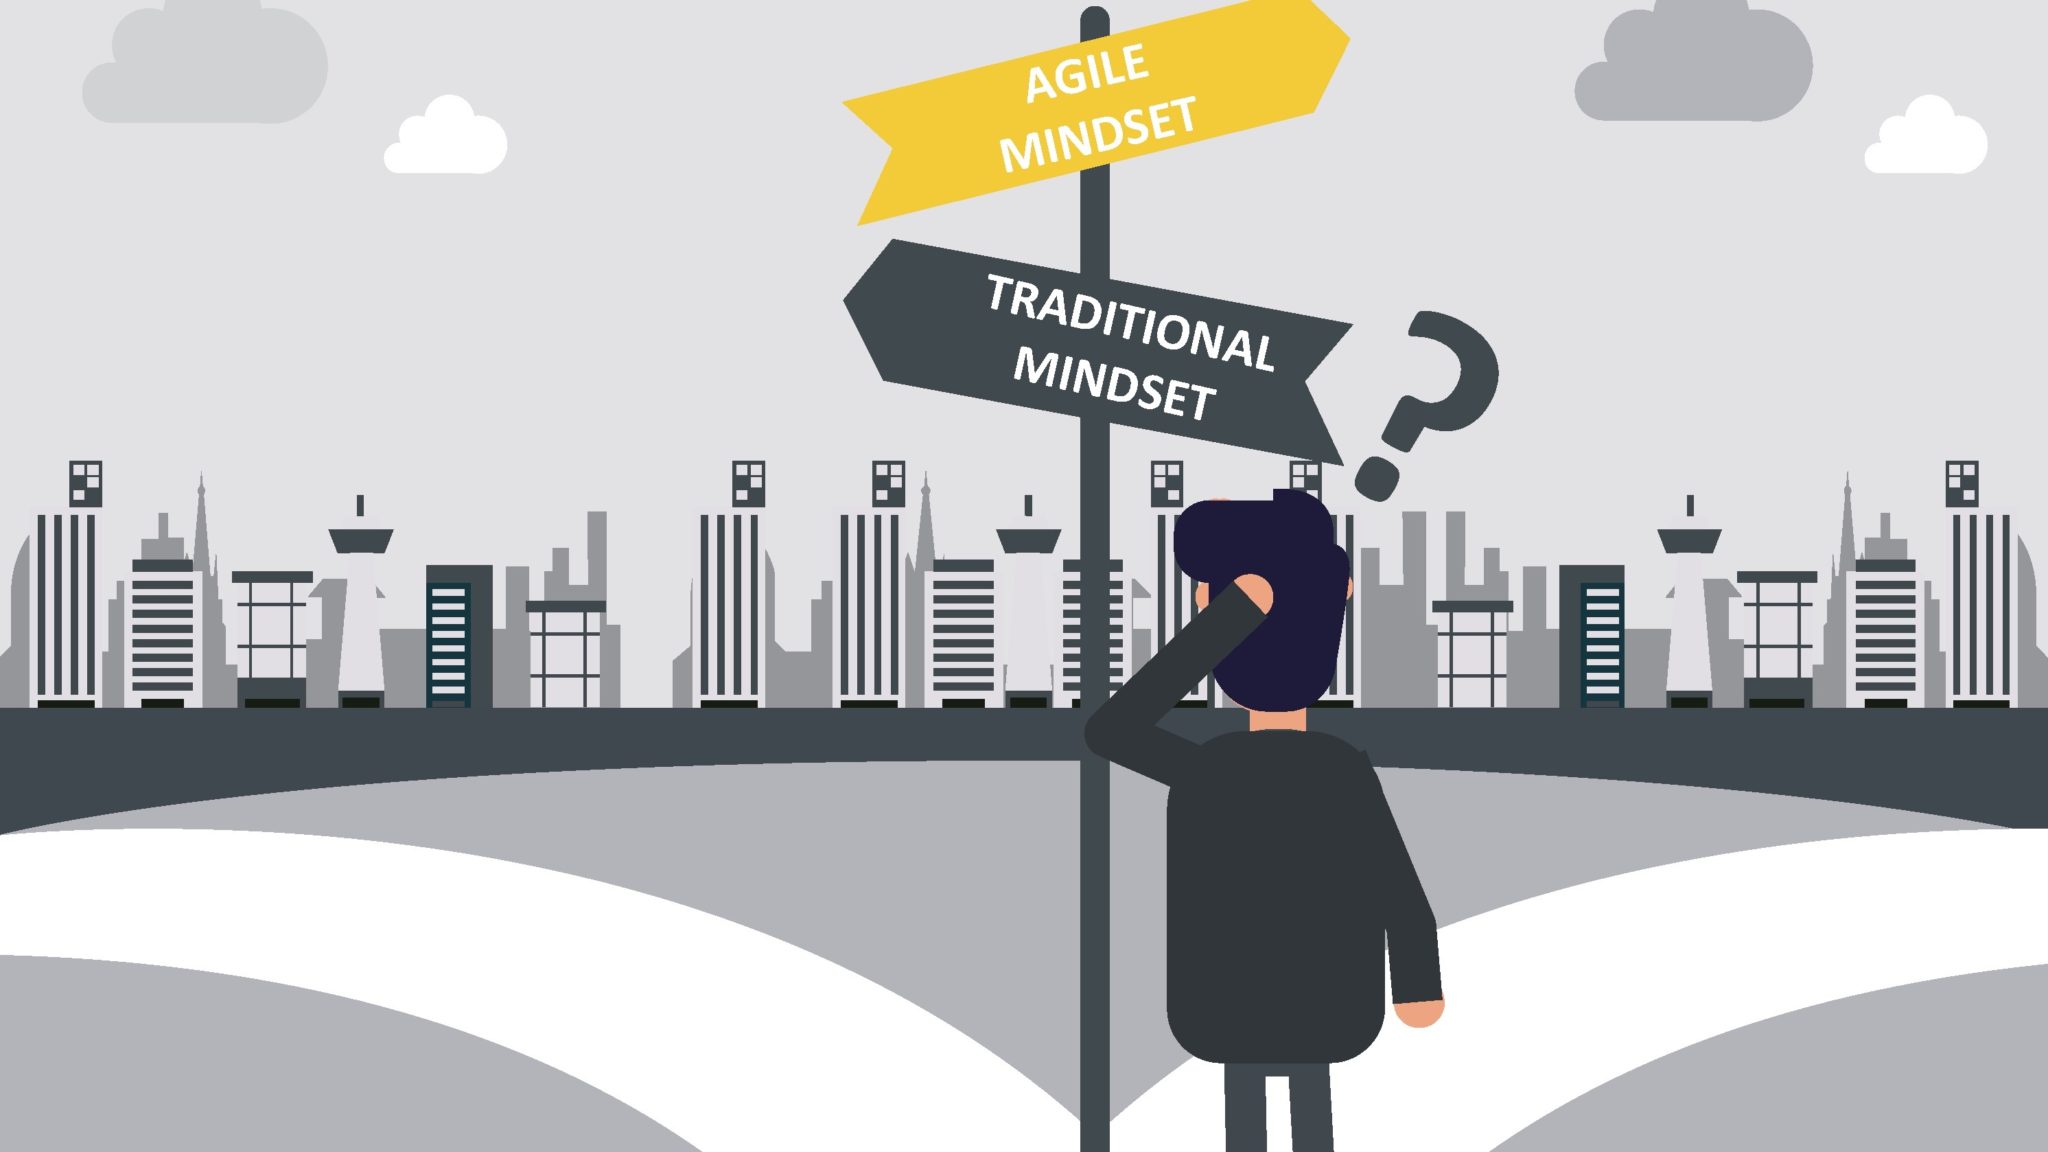 5 Reasons Why Agile Mindset is Key to Get Through COVID-19